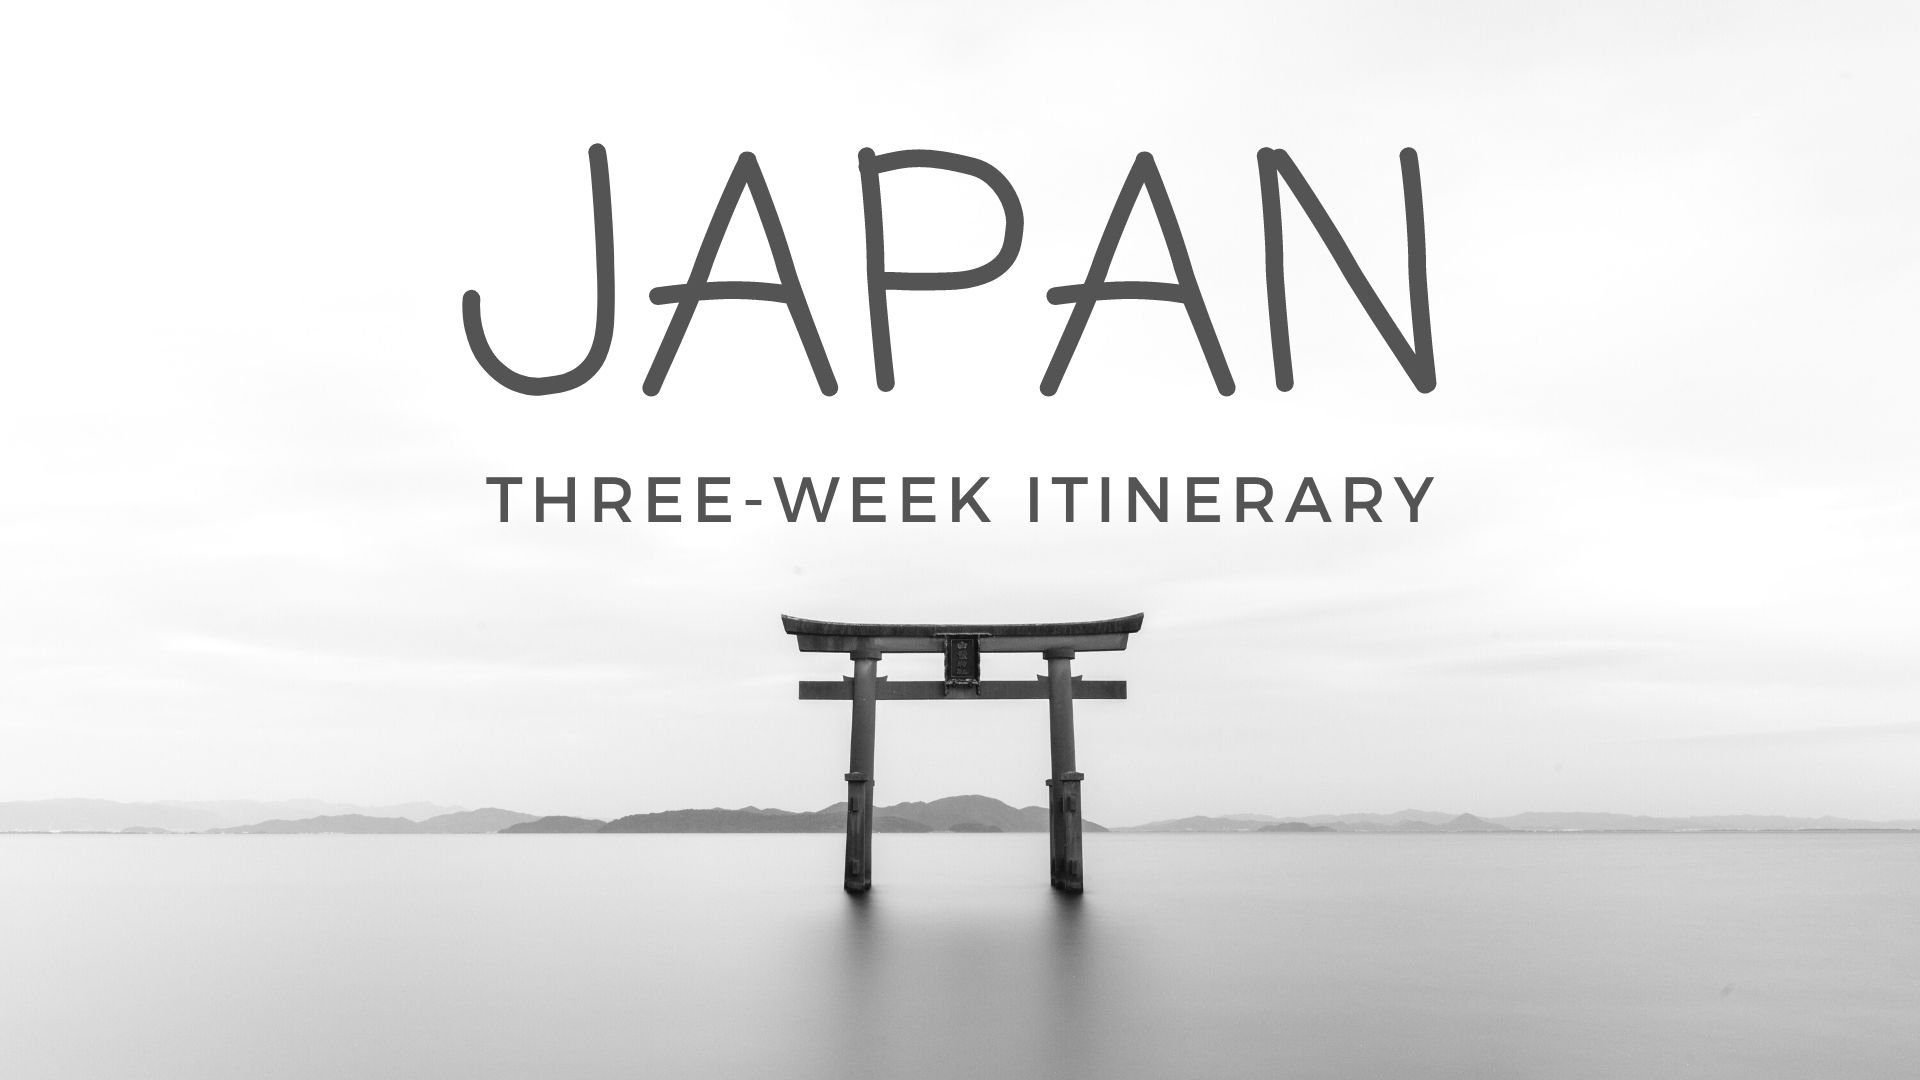 Three weeks in japan itinerary, three weeks backpacking japan itinerary cover